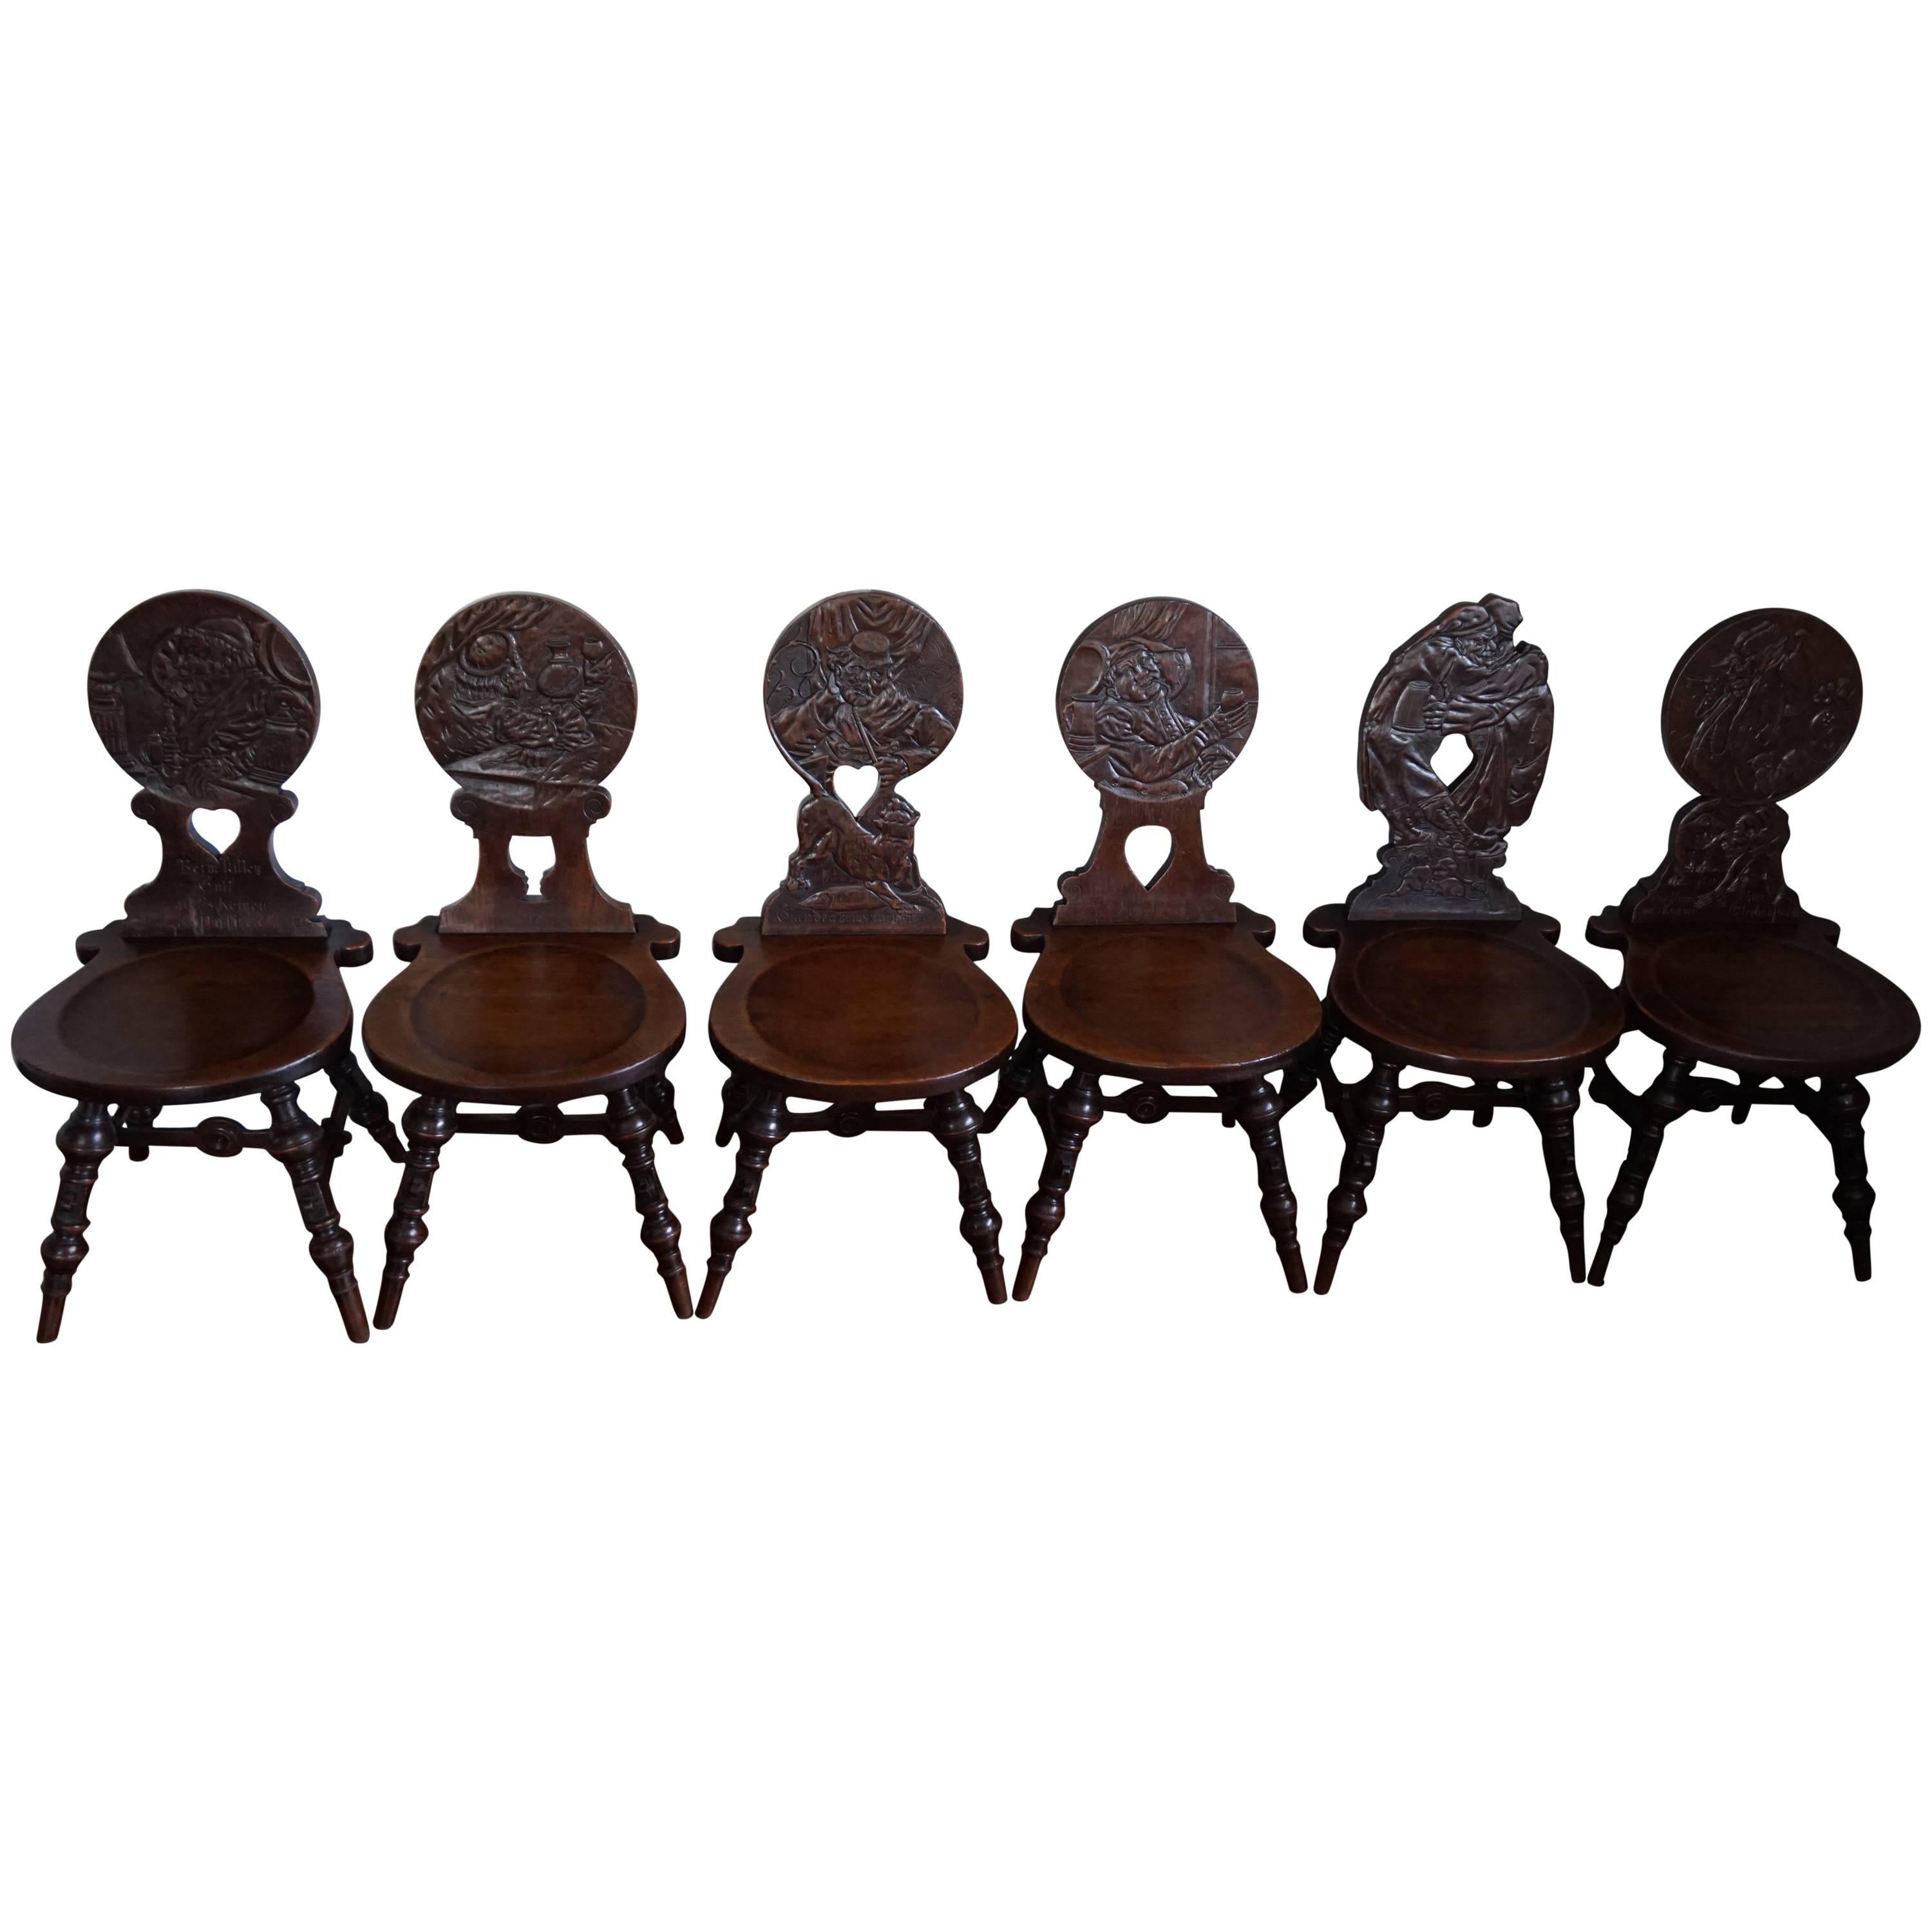 Six Antique & Hand-Carved German Tavern / Drinking Chairs with Aphorisms Sayings